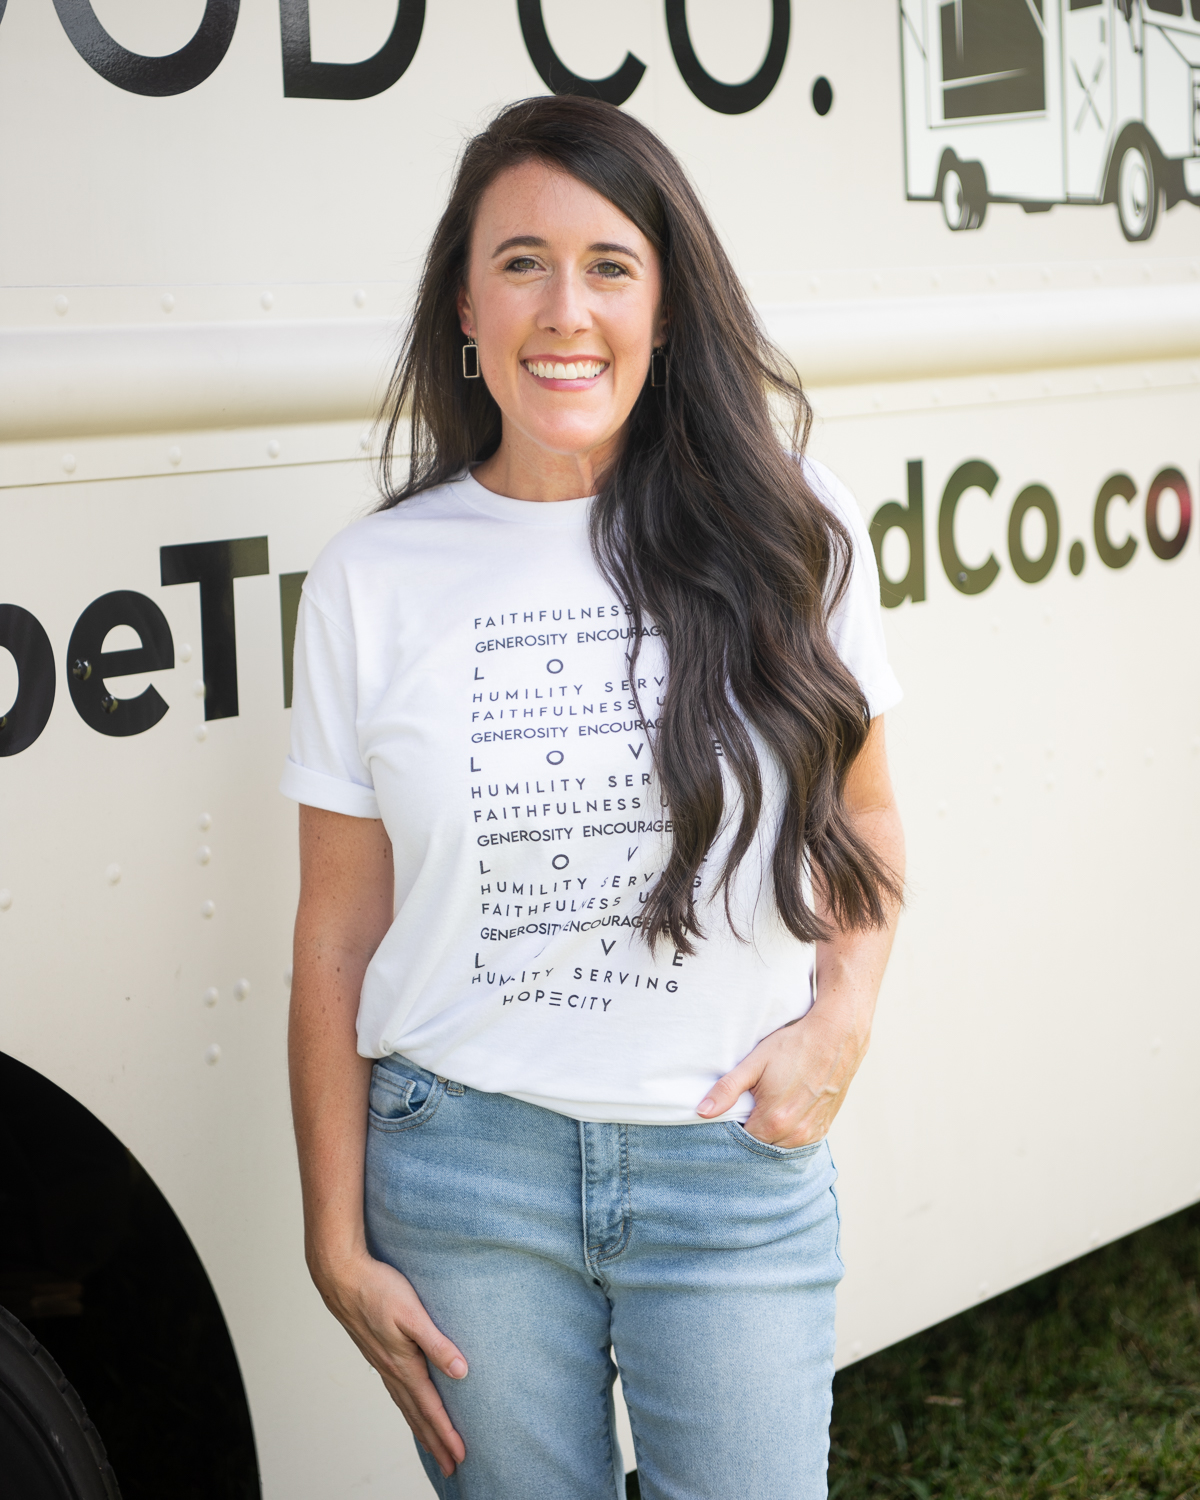 Jamie Vie, Executive Director of Hope Food Co. stands in front of the food truck in High Point, NC.